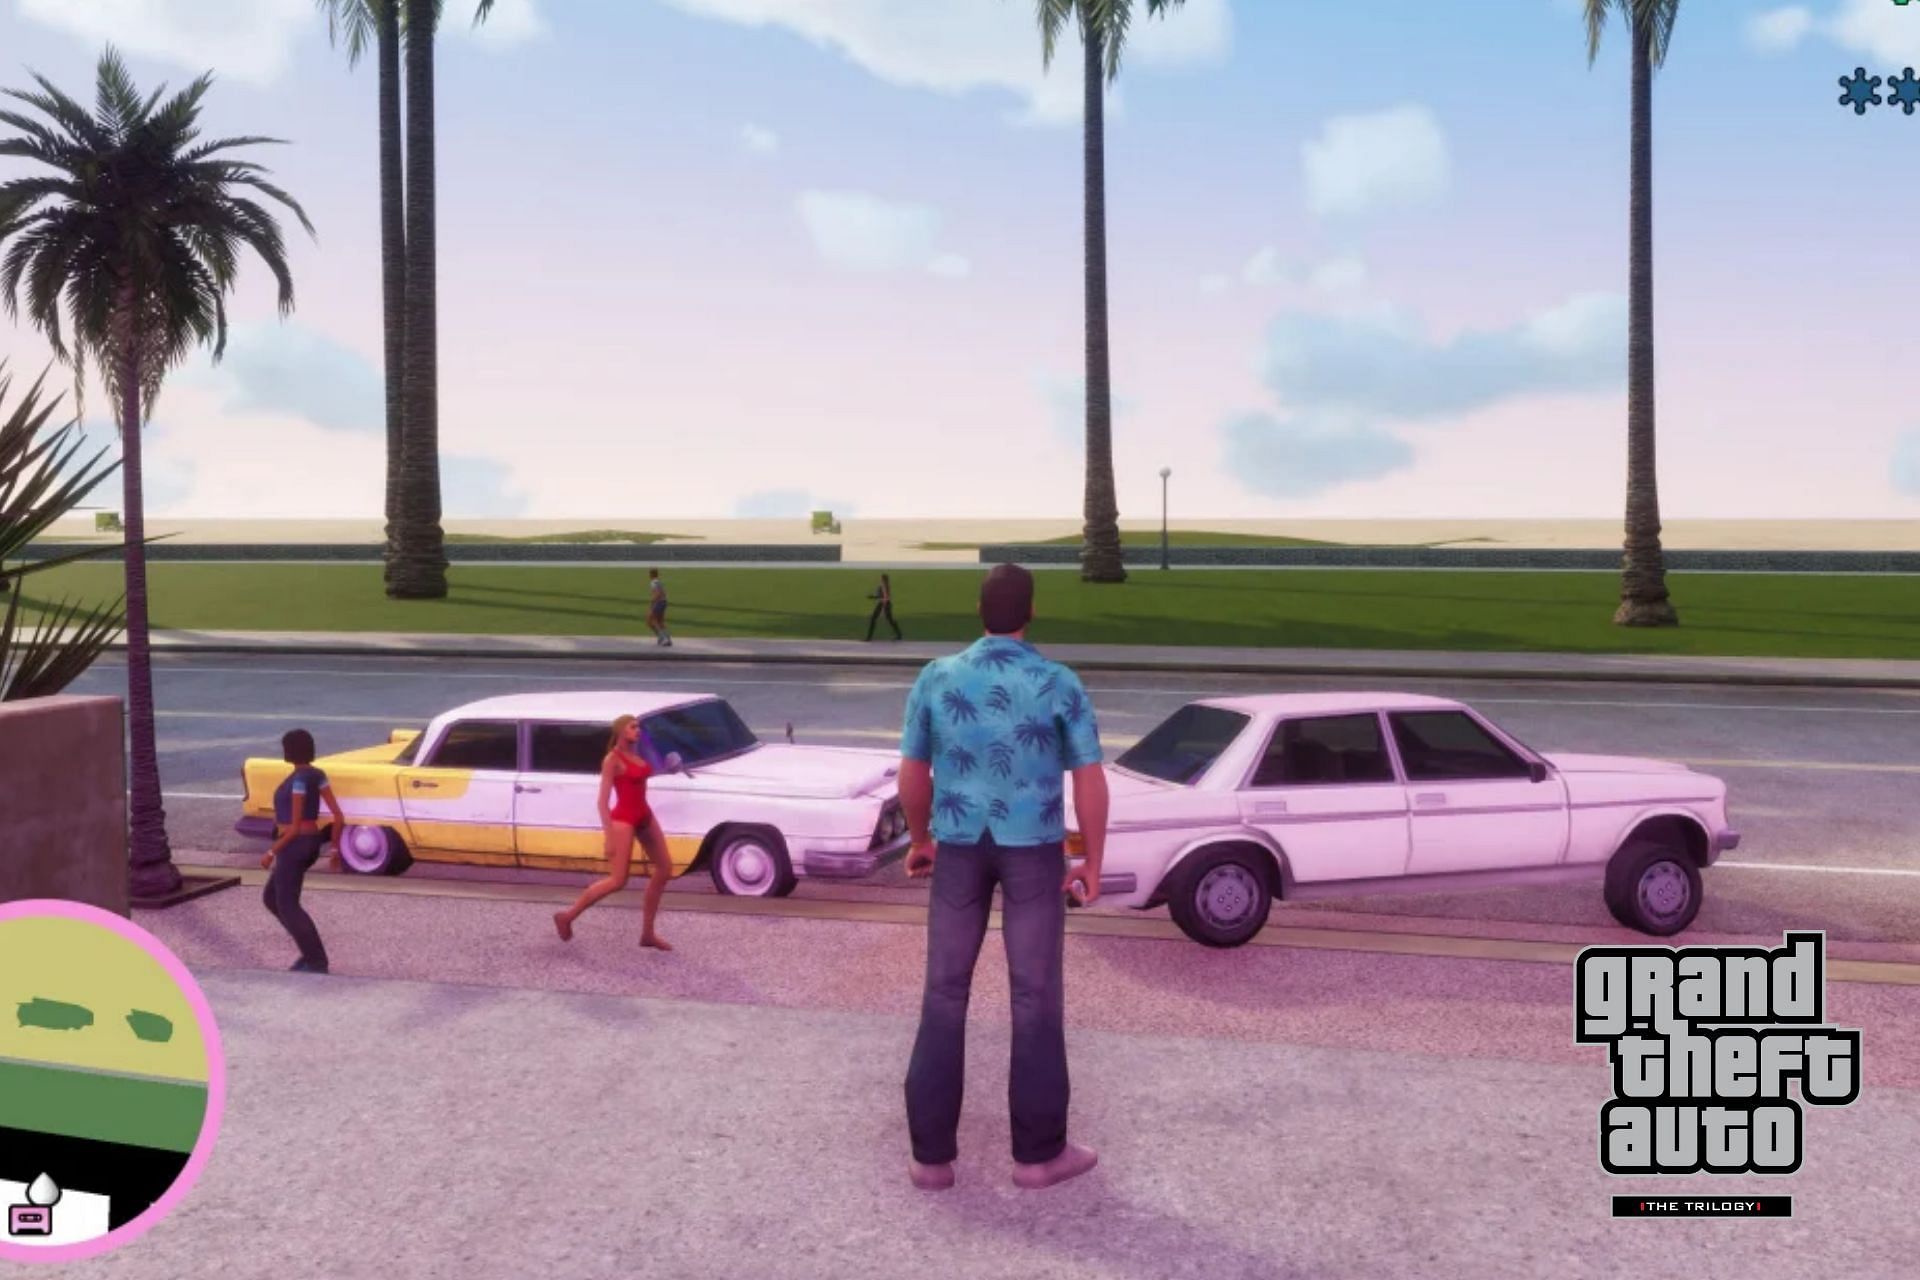 GTA Vice City: The Definitive Edition - Remaster HD Gameplay (Android/iOS)  